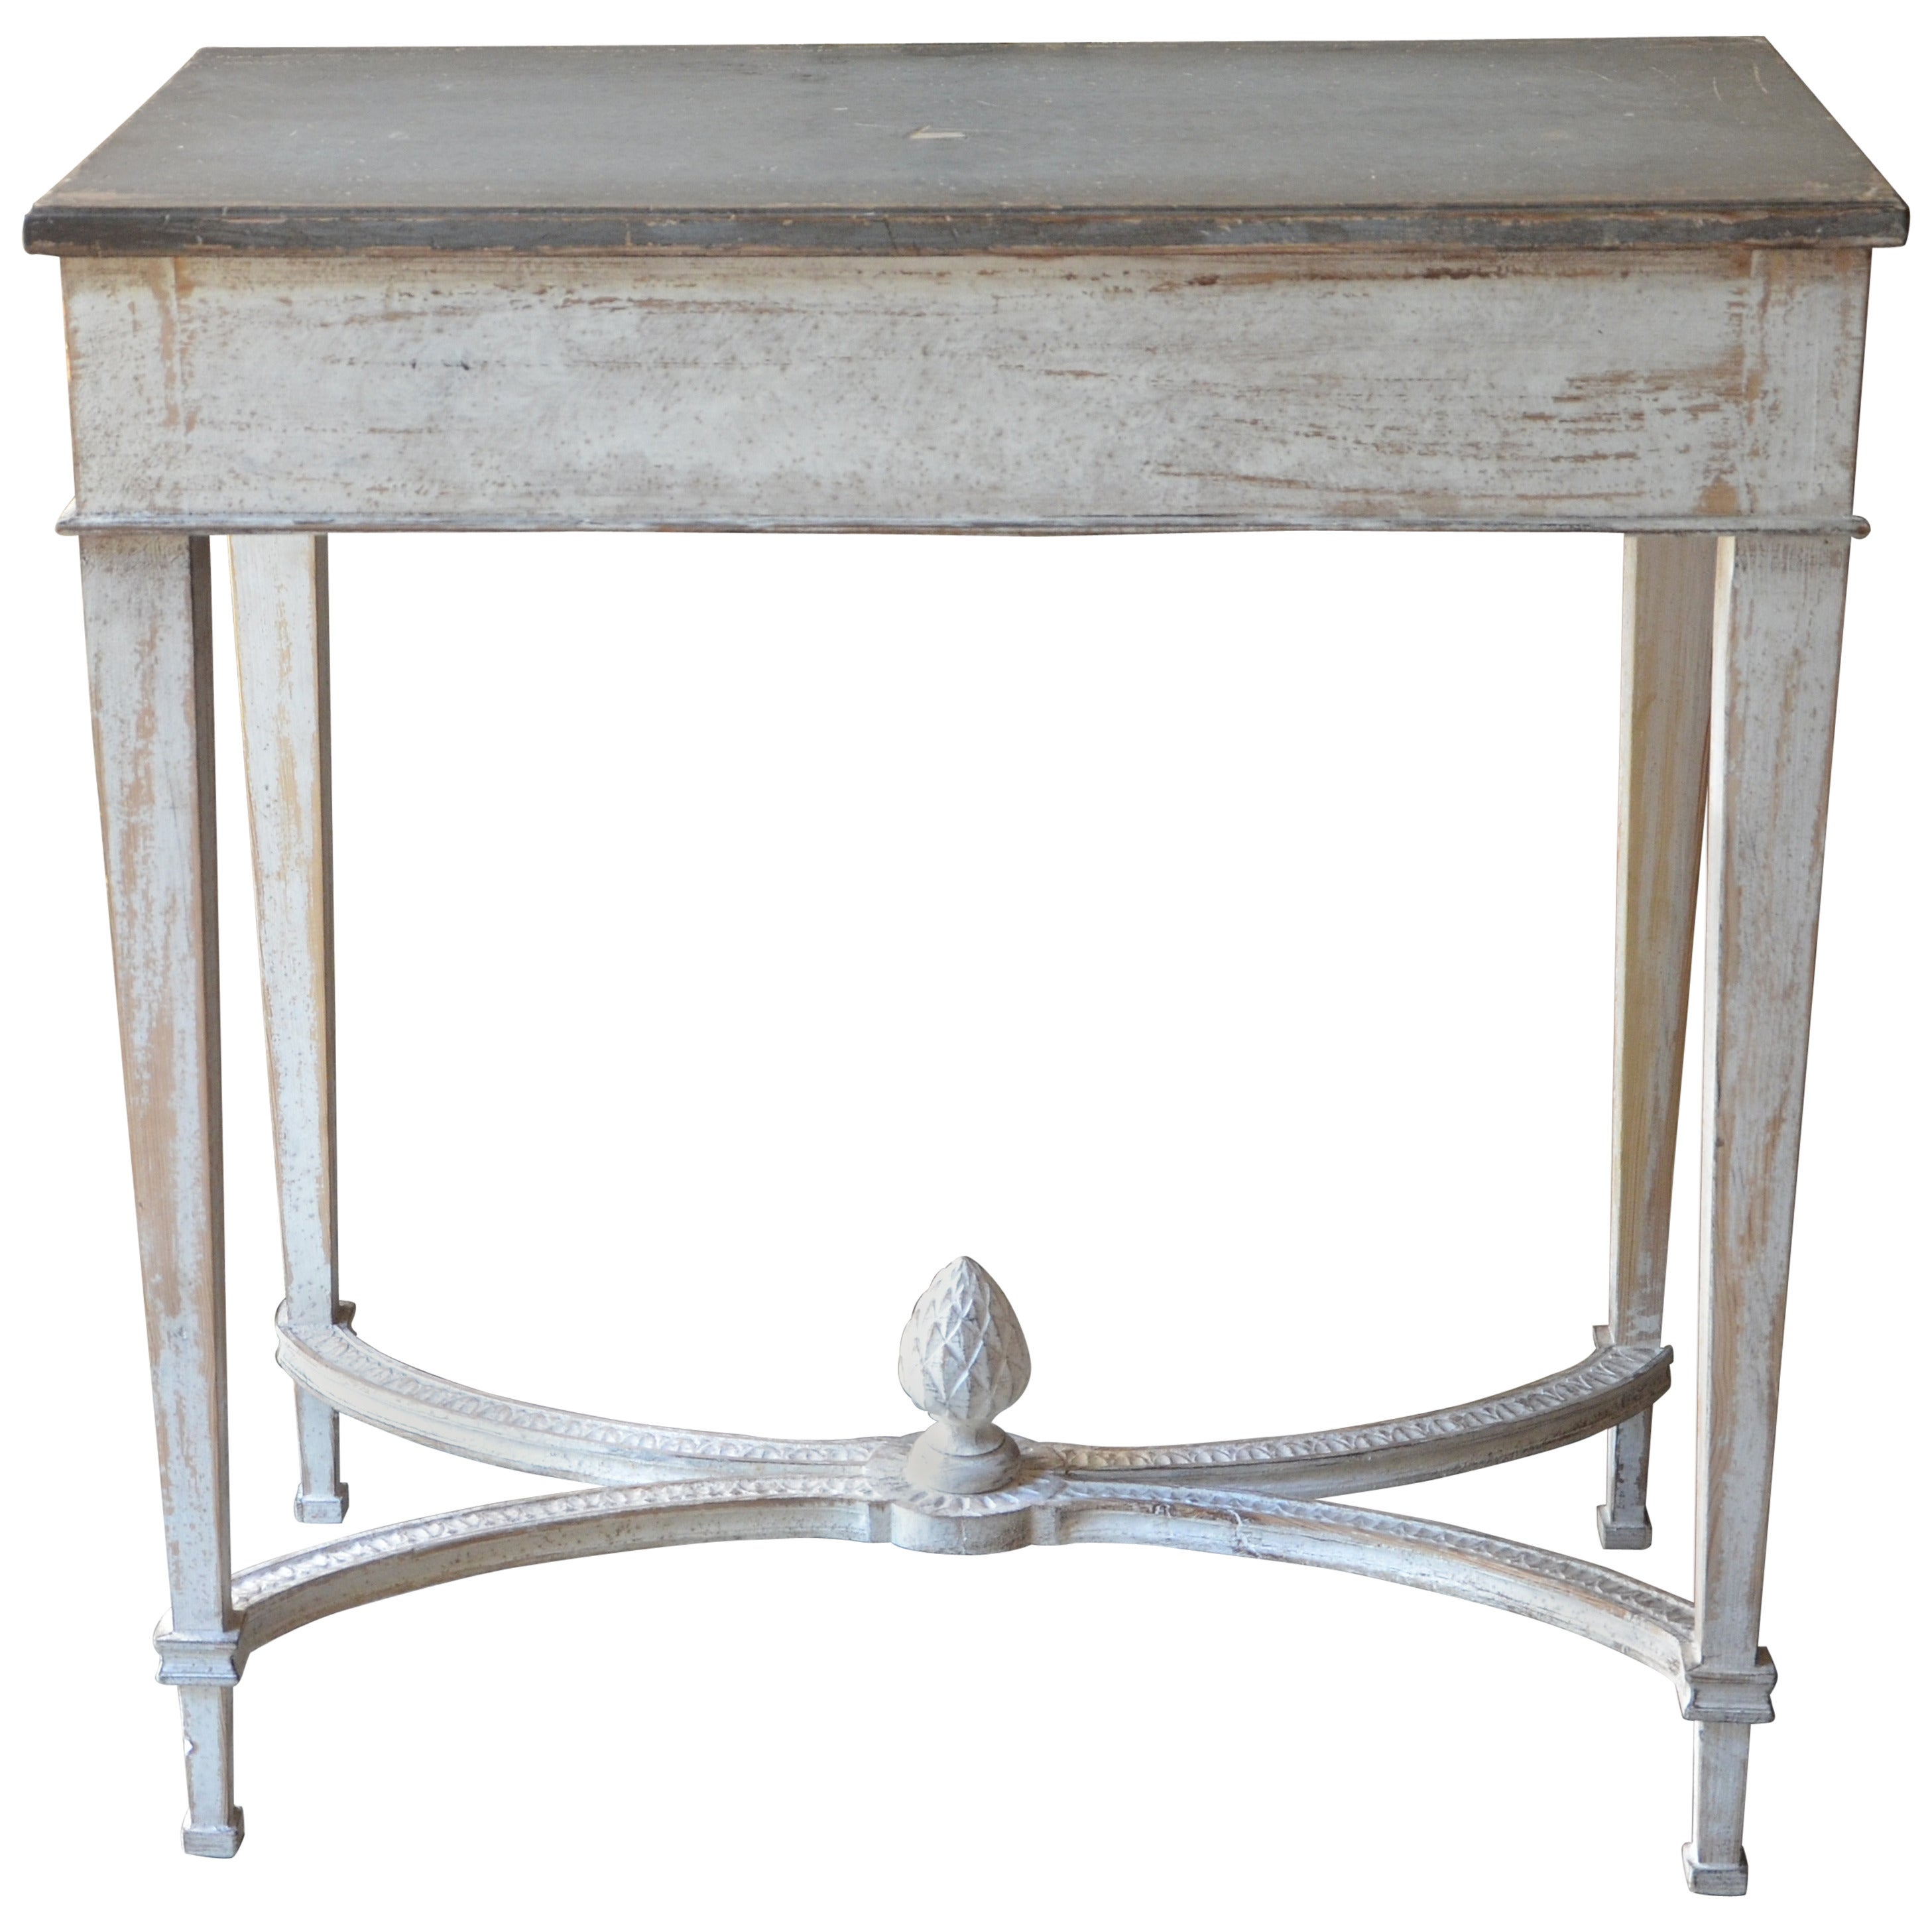 19th Century Gustavian Style Console Table